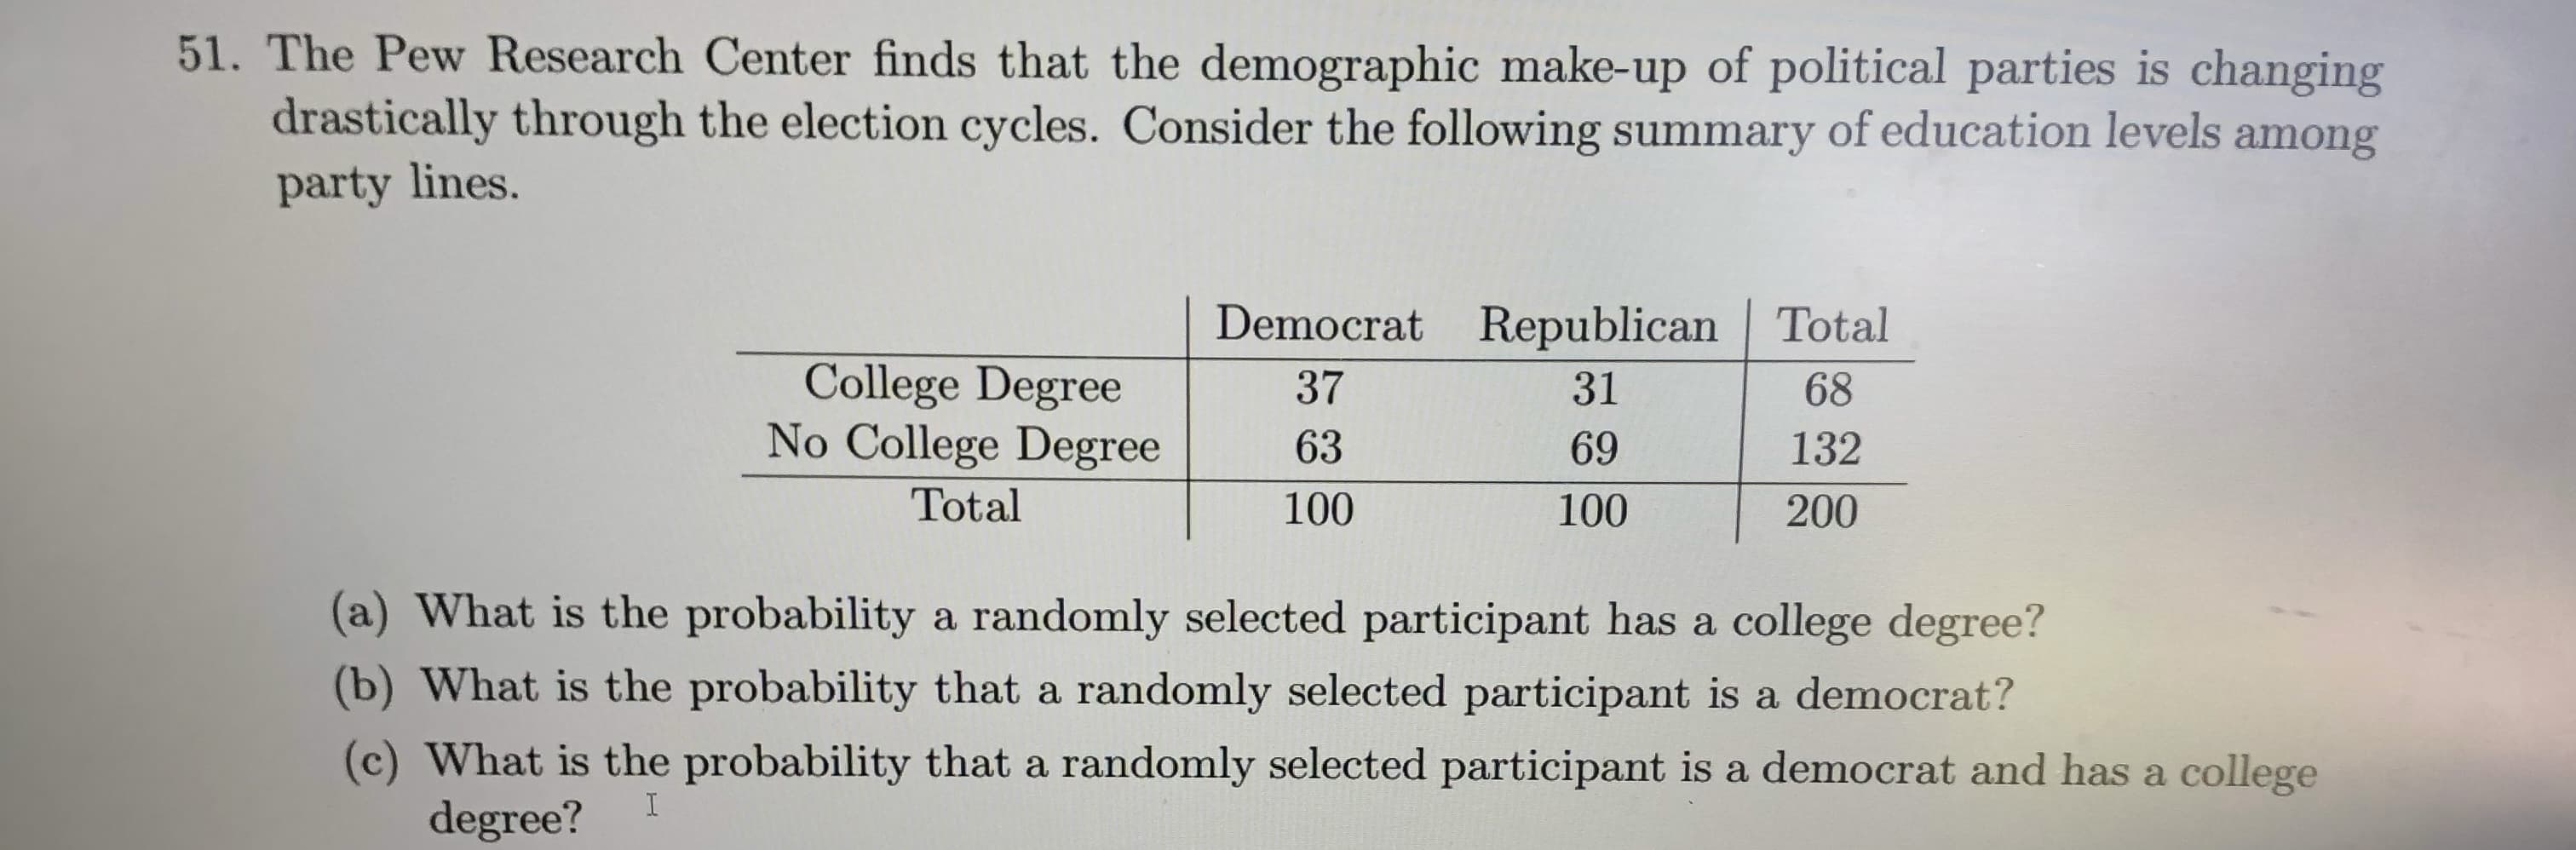 The Pew Research Center finds that the demographic make-up of political parties is changir
drastically through the election cycles. Consider the following summary of education levels amon
party lines.
Democrat Republican Total
College Degree
No College Degree
37
31
68
63
69
132
Total
100
100
200
(a) What is the probability a randomly selected participant has a college degree?
(b) What is the probability that a randomly selected participant is a democrat?
(c) What is the probability that a randomly selected participant is a democrat and has a college
degree?
I
